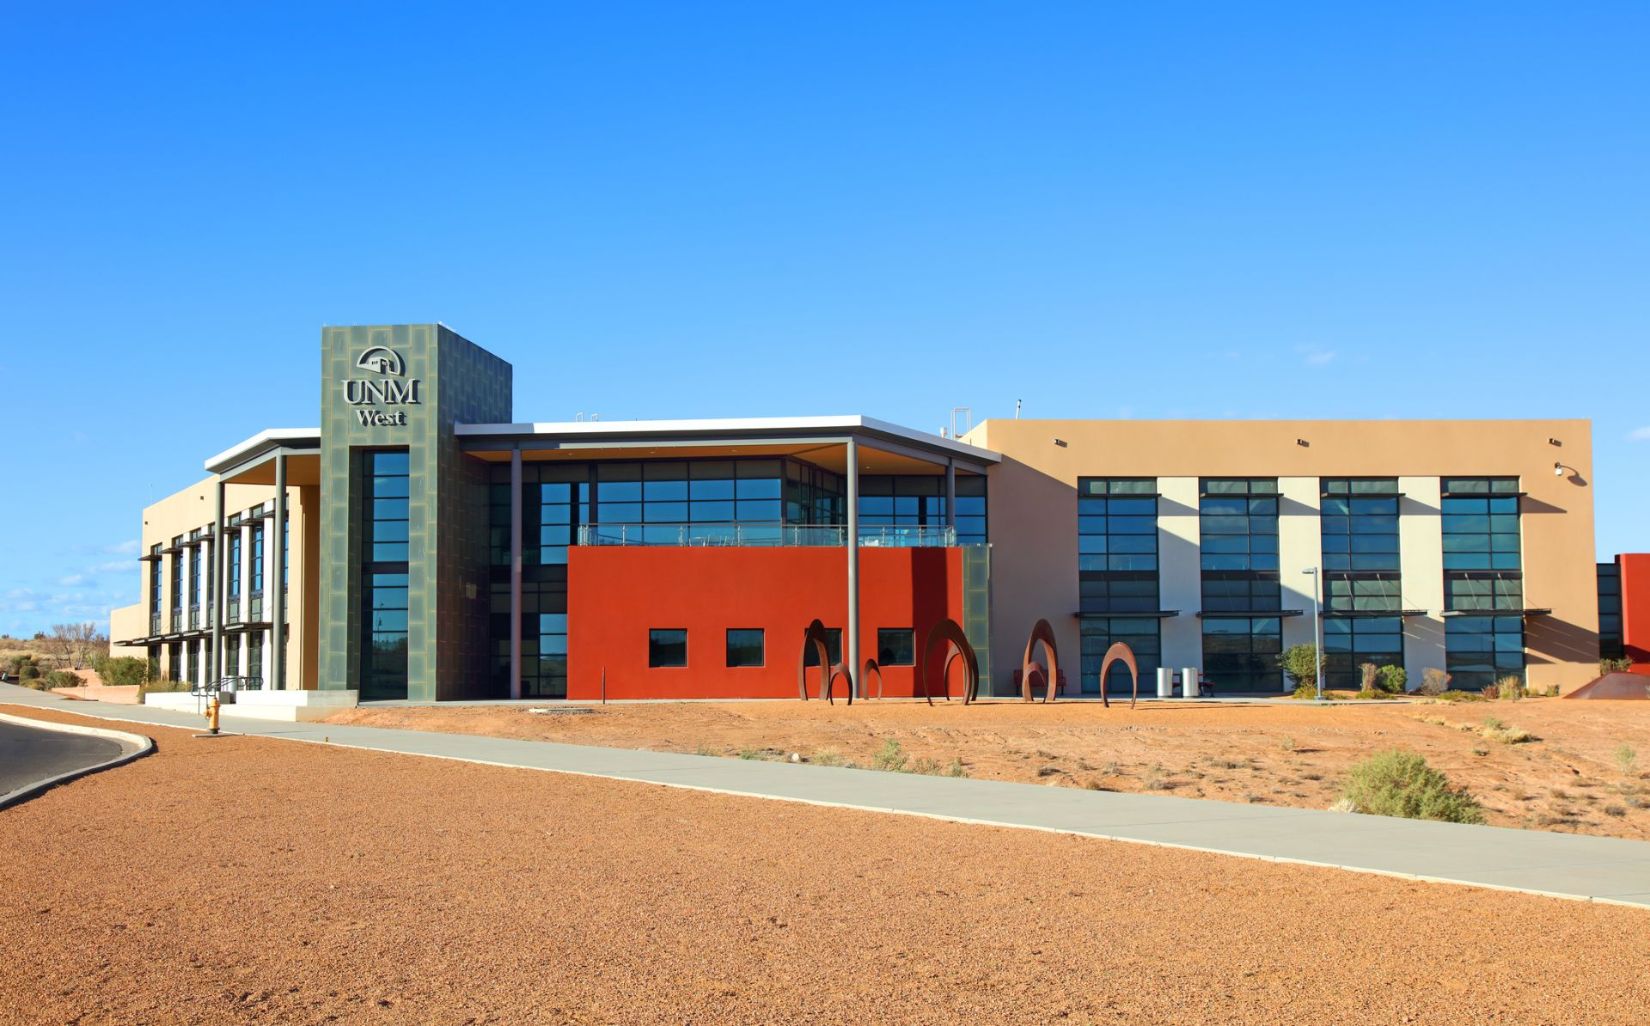 Daytime view of the main campus of the University of New Mexico West